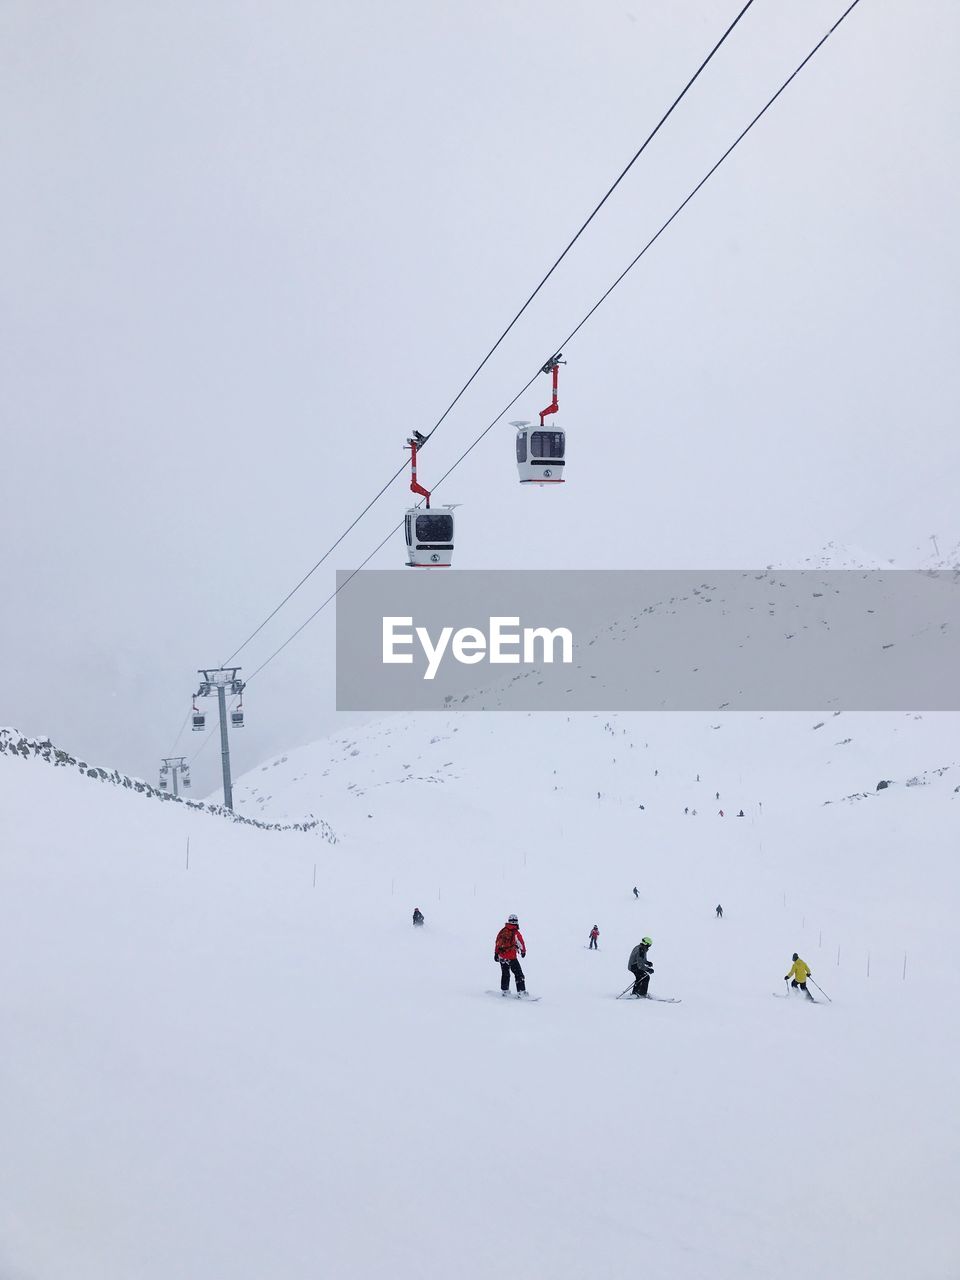 People skiing over ski lift during winter